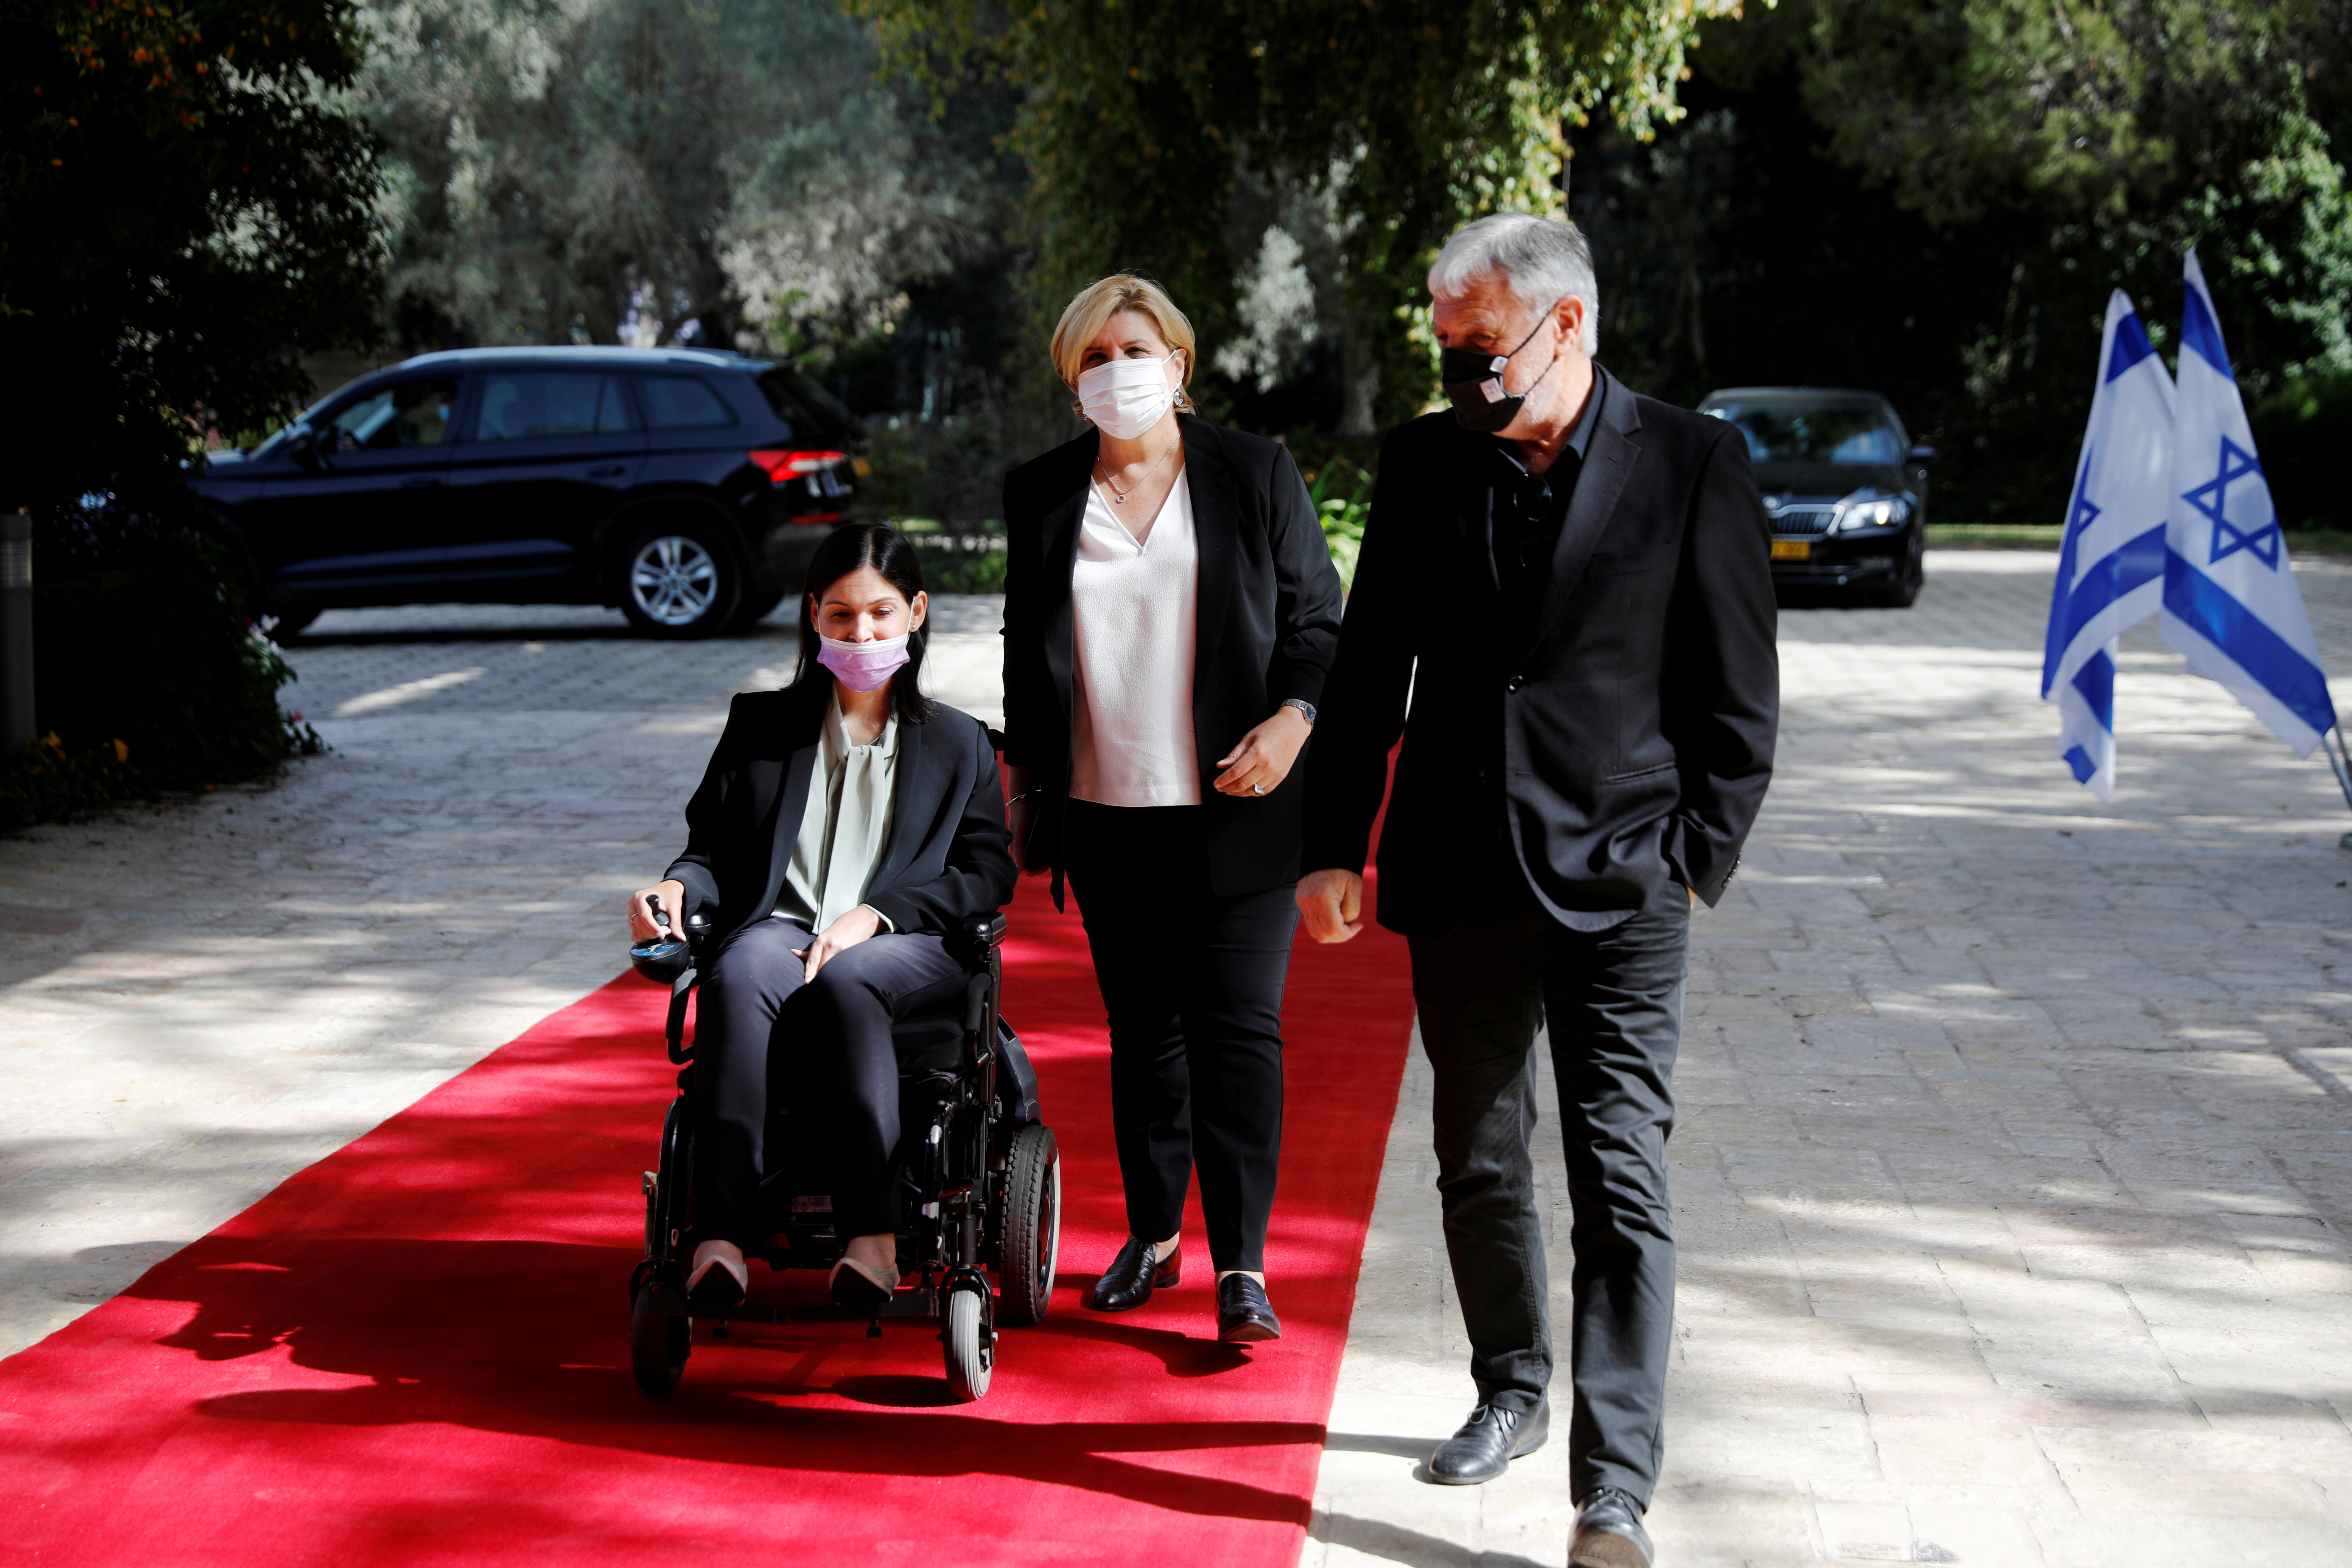 Karine Elharrar, Orna Barbivai and Meir Cohen from the Yesh Atid party arrive for consultations on the formation of a coalition government,